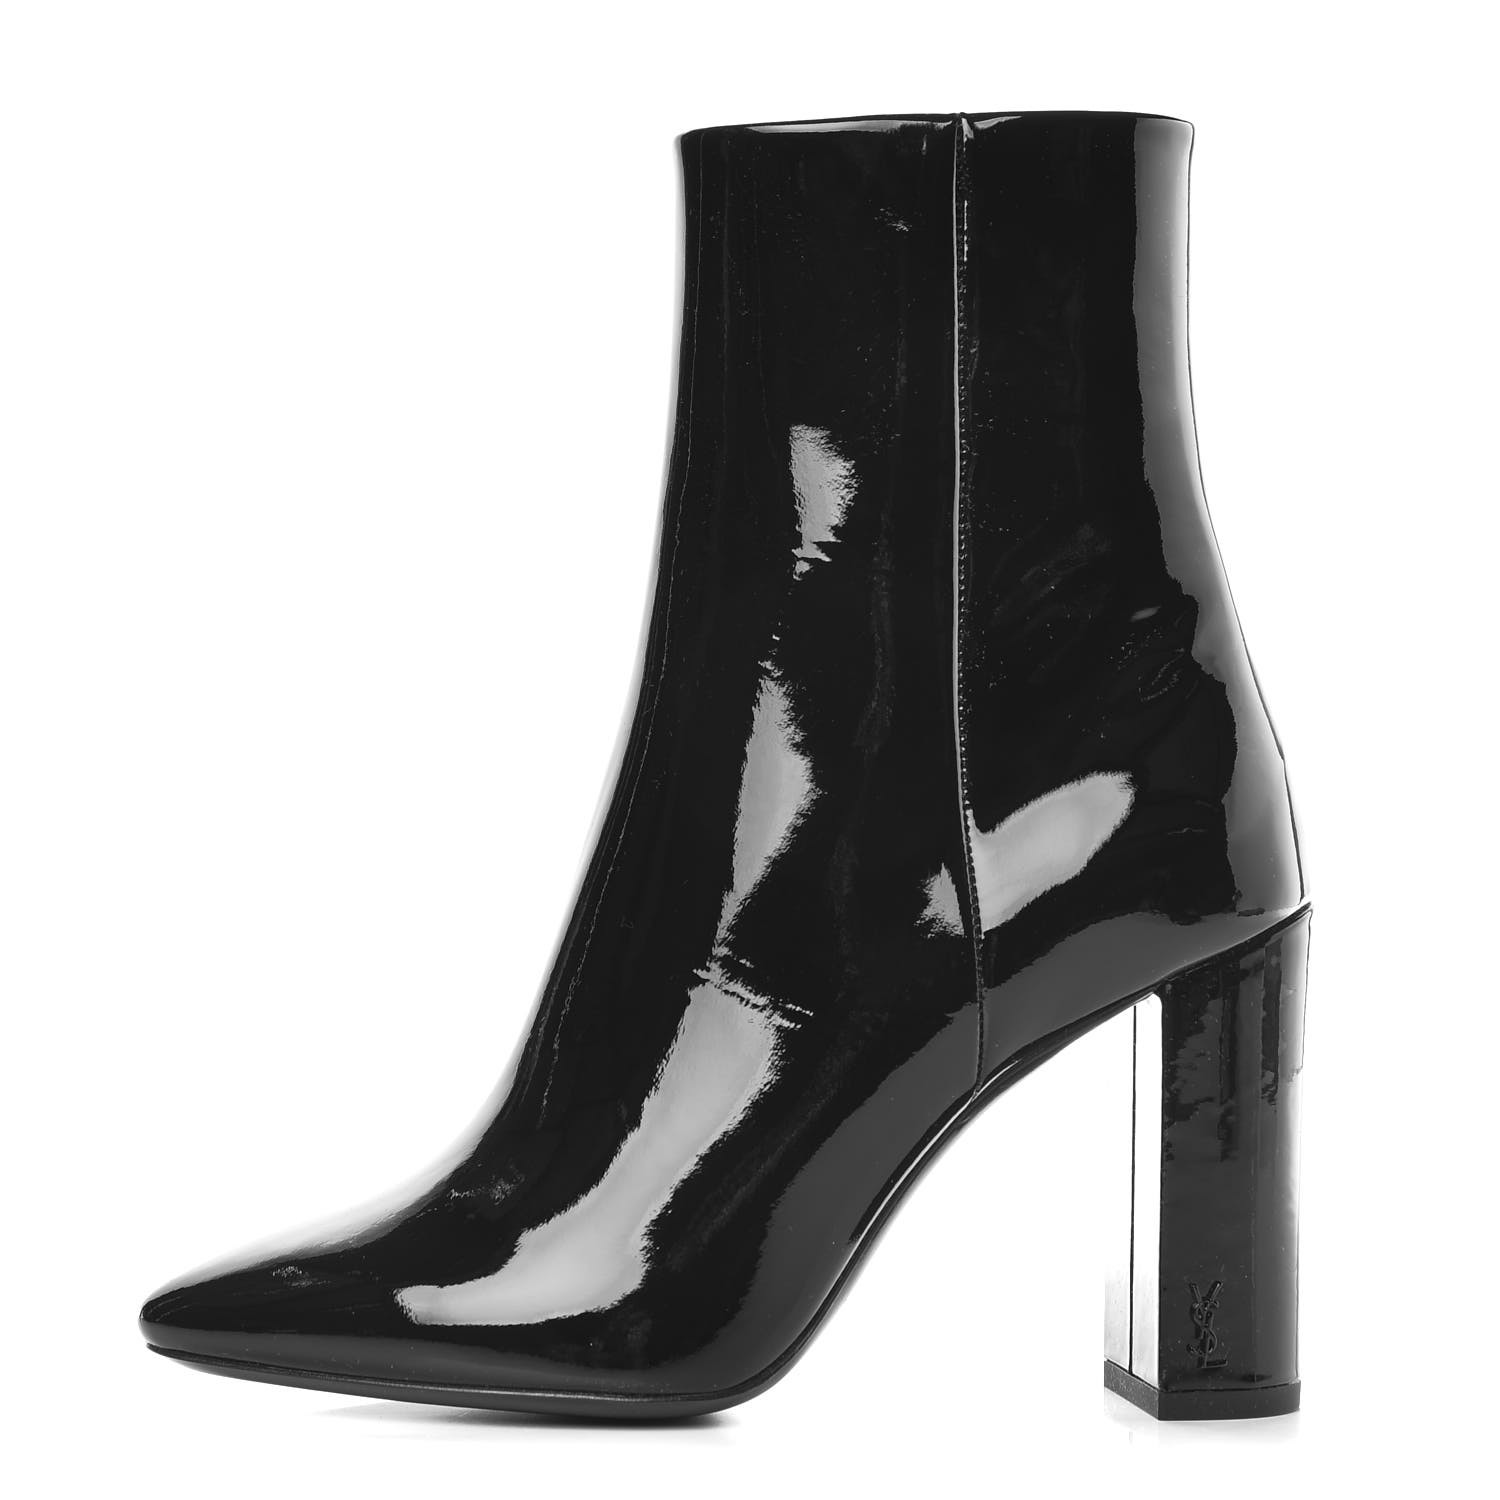 ysl patent leather booties